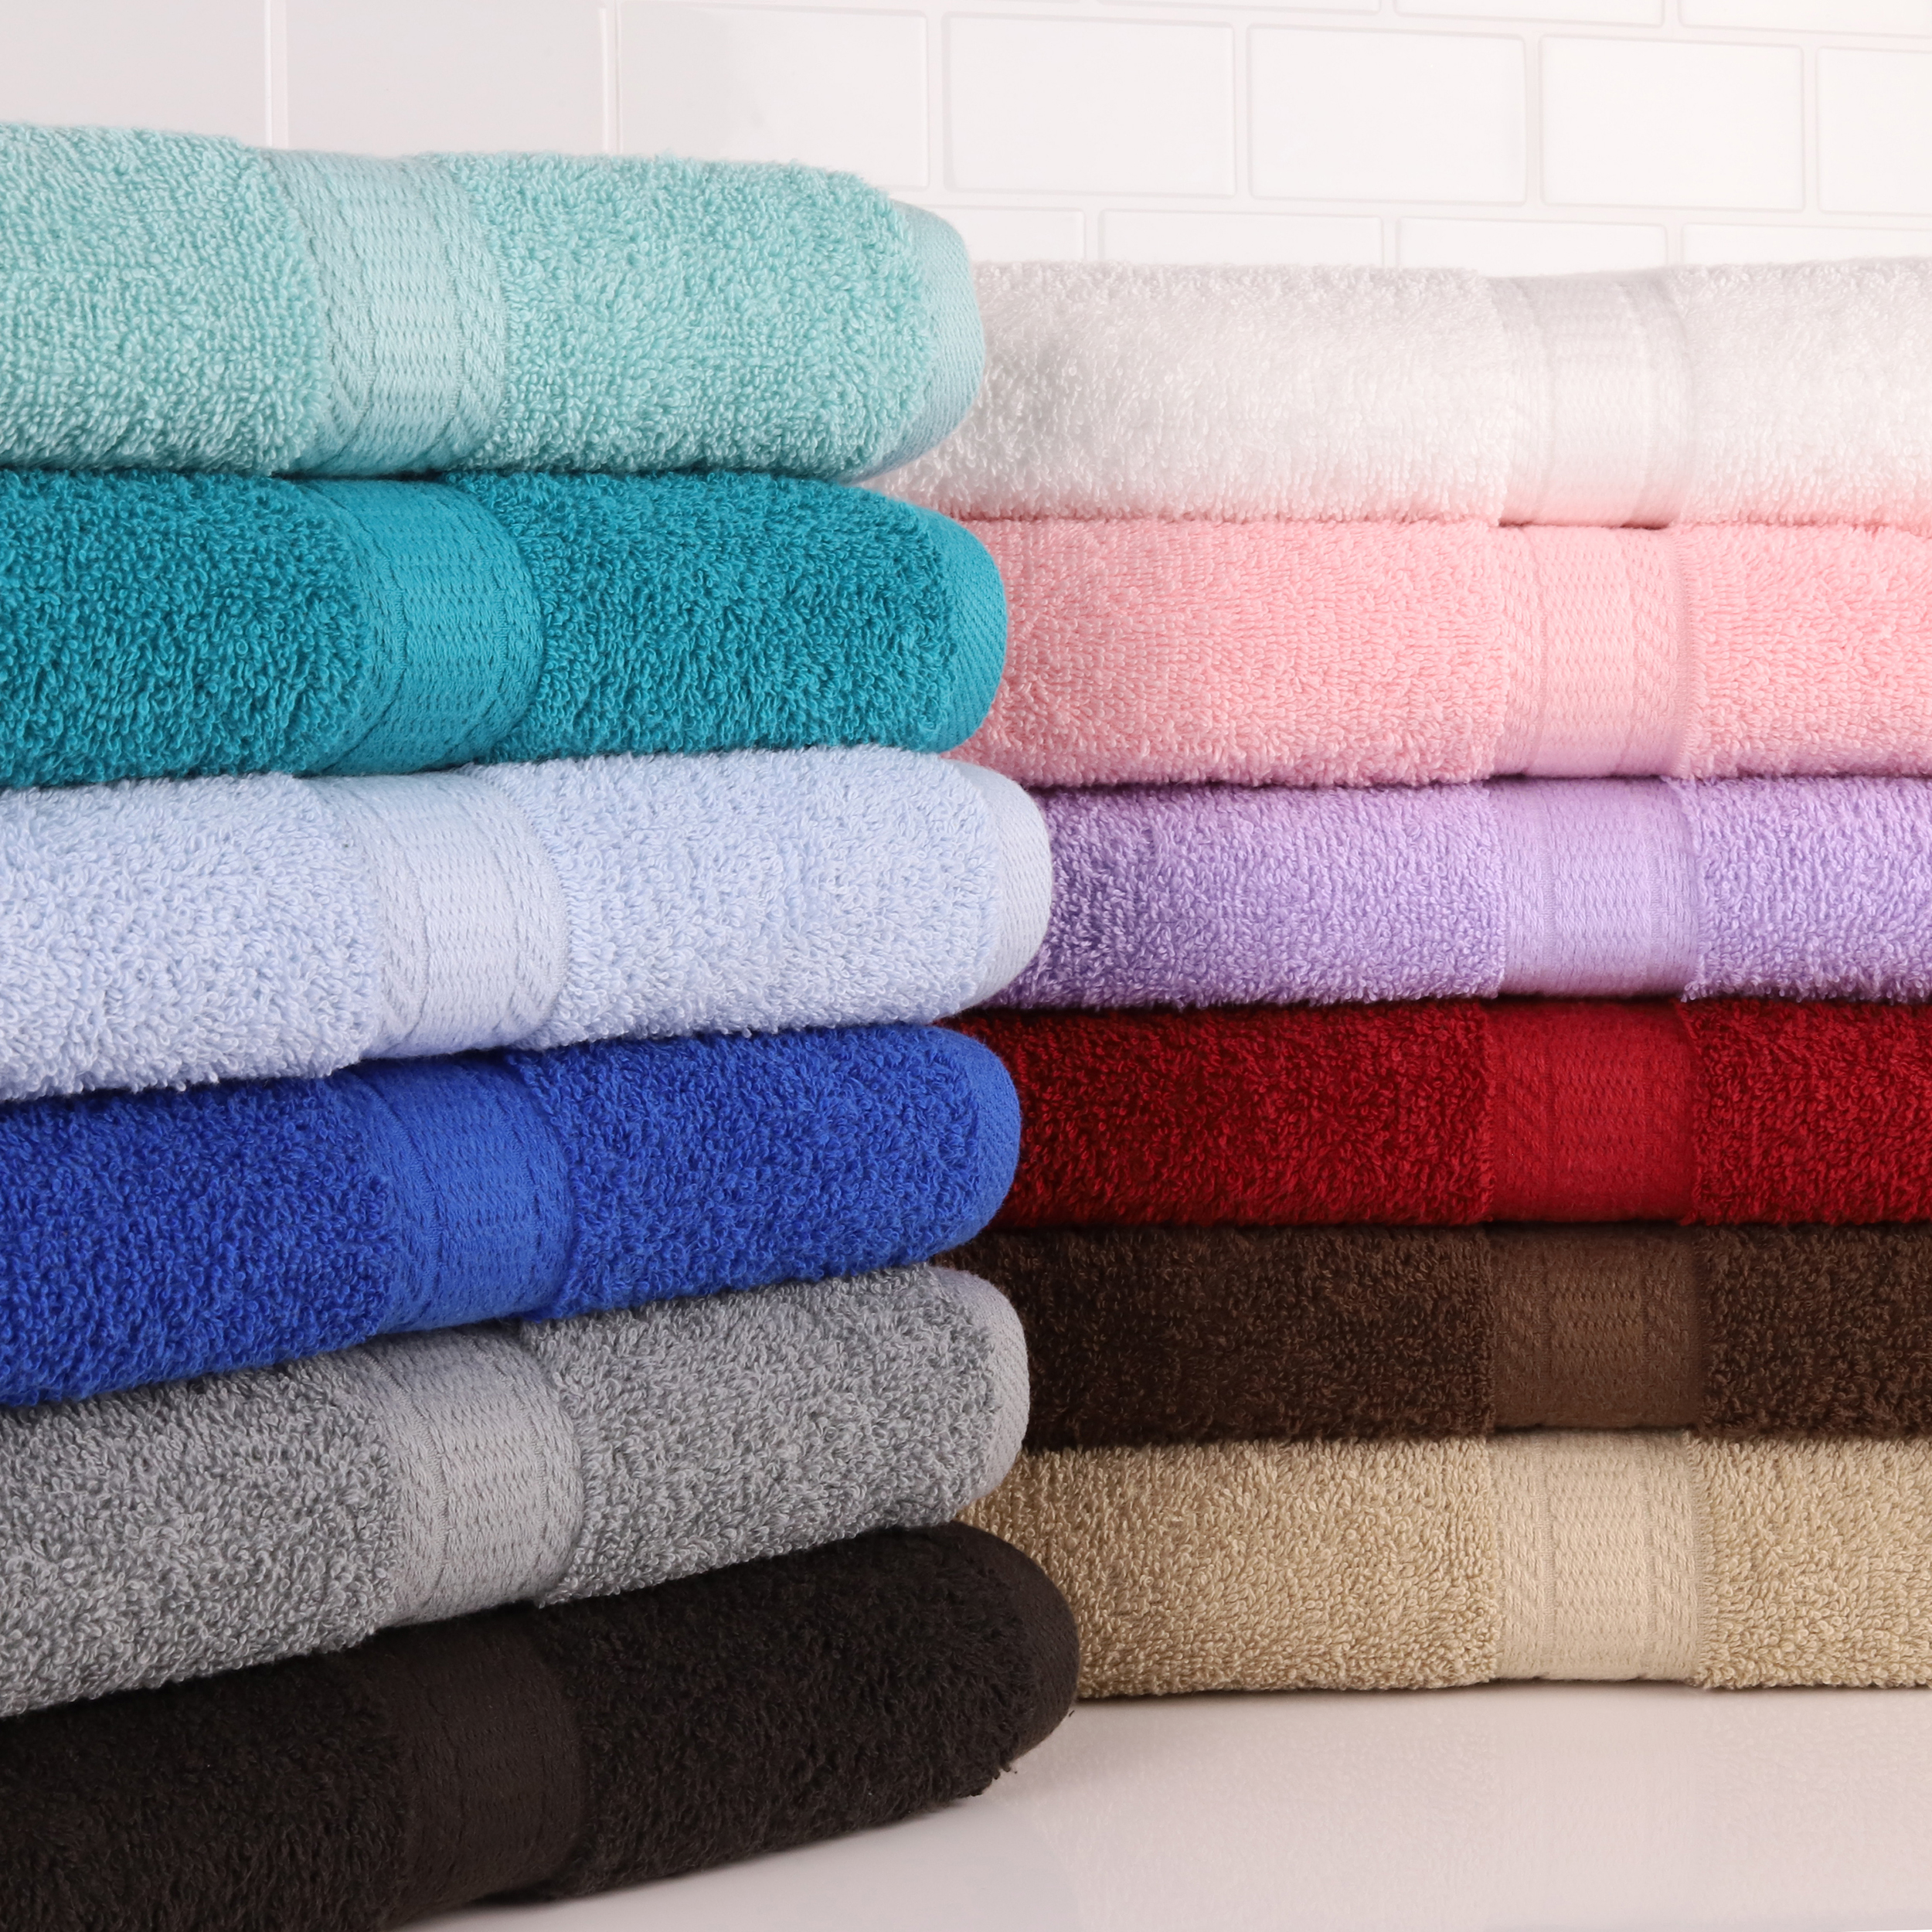 Mainstays Basic Solid 18-Piece Bath Towel Set Collection, Brown - image 3 of 10